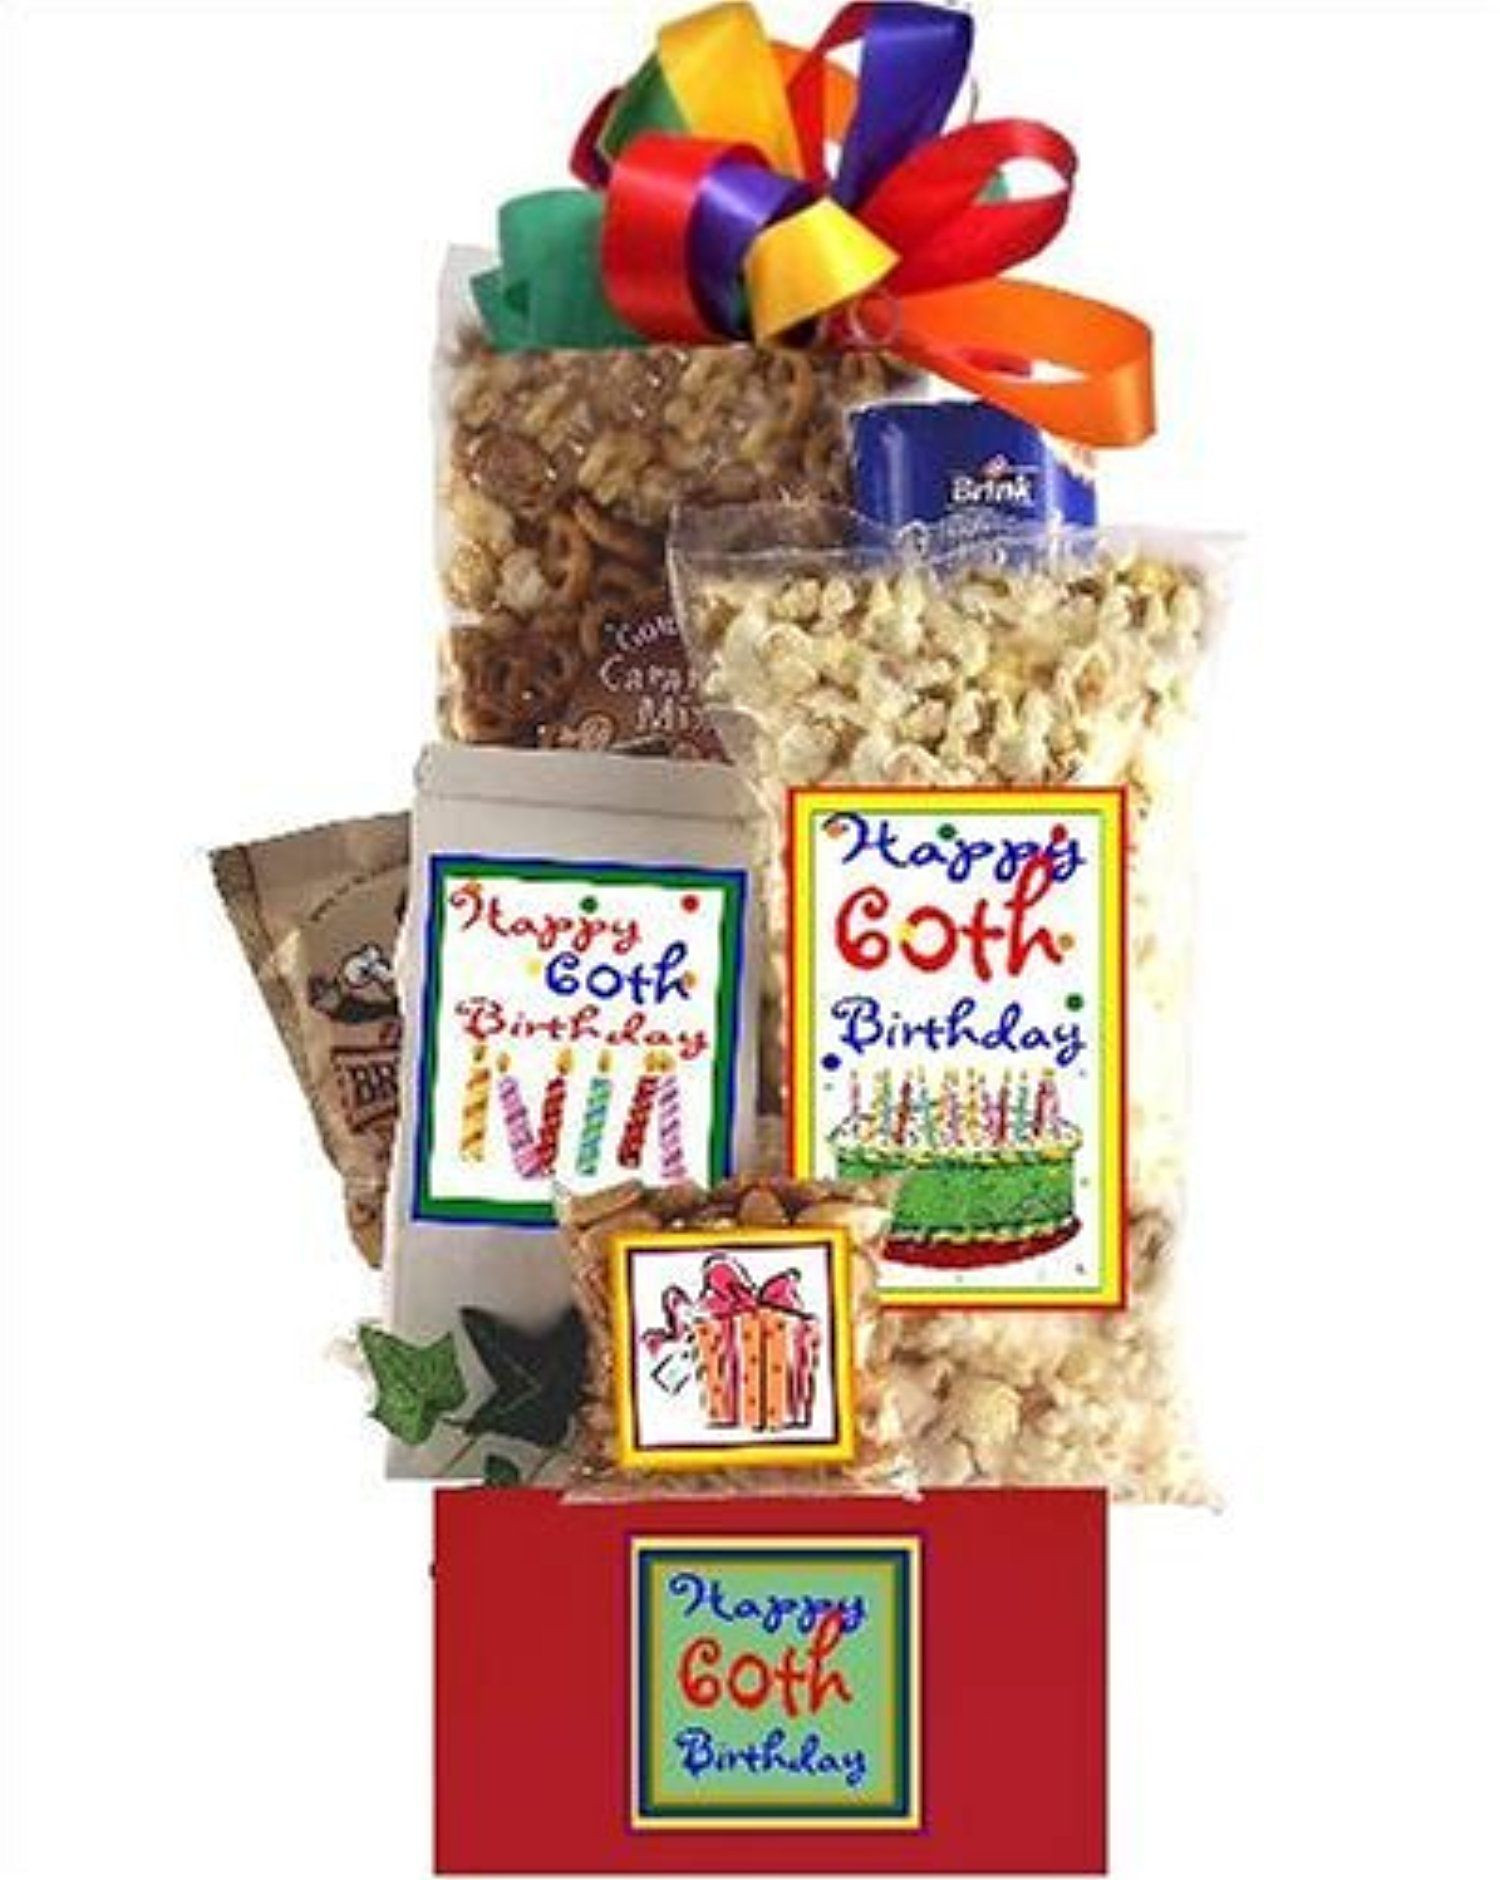 60Th Birthday Gift Basket Ideas
 60th Birthday Gift Basket Delight by Great Themes Galore